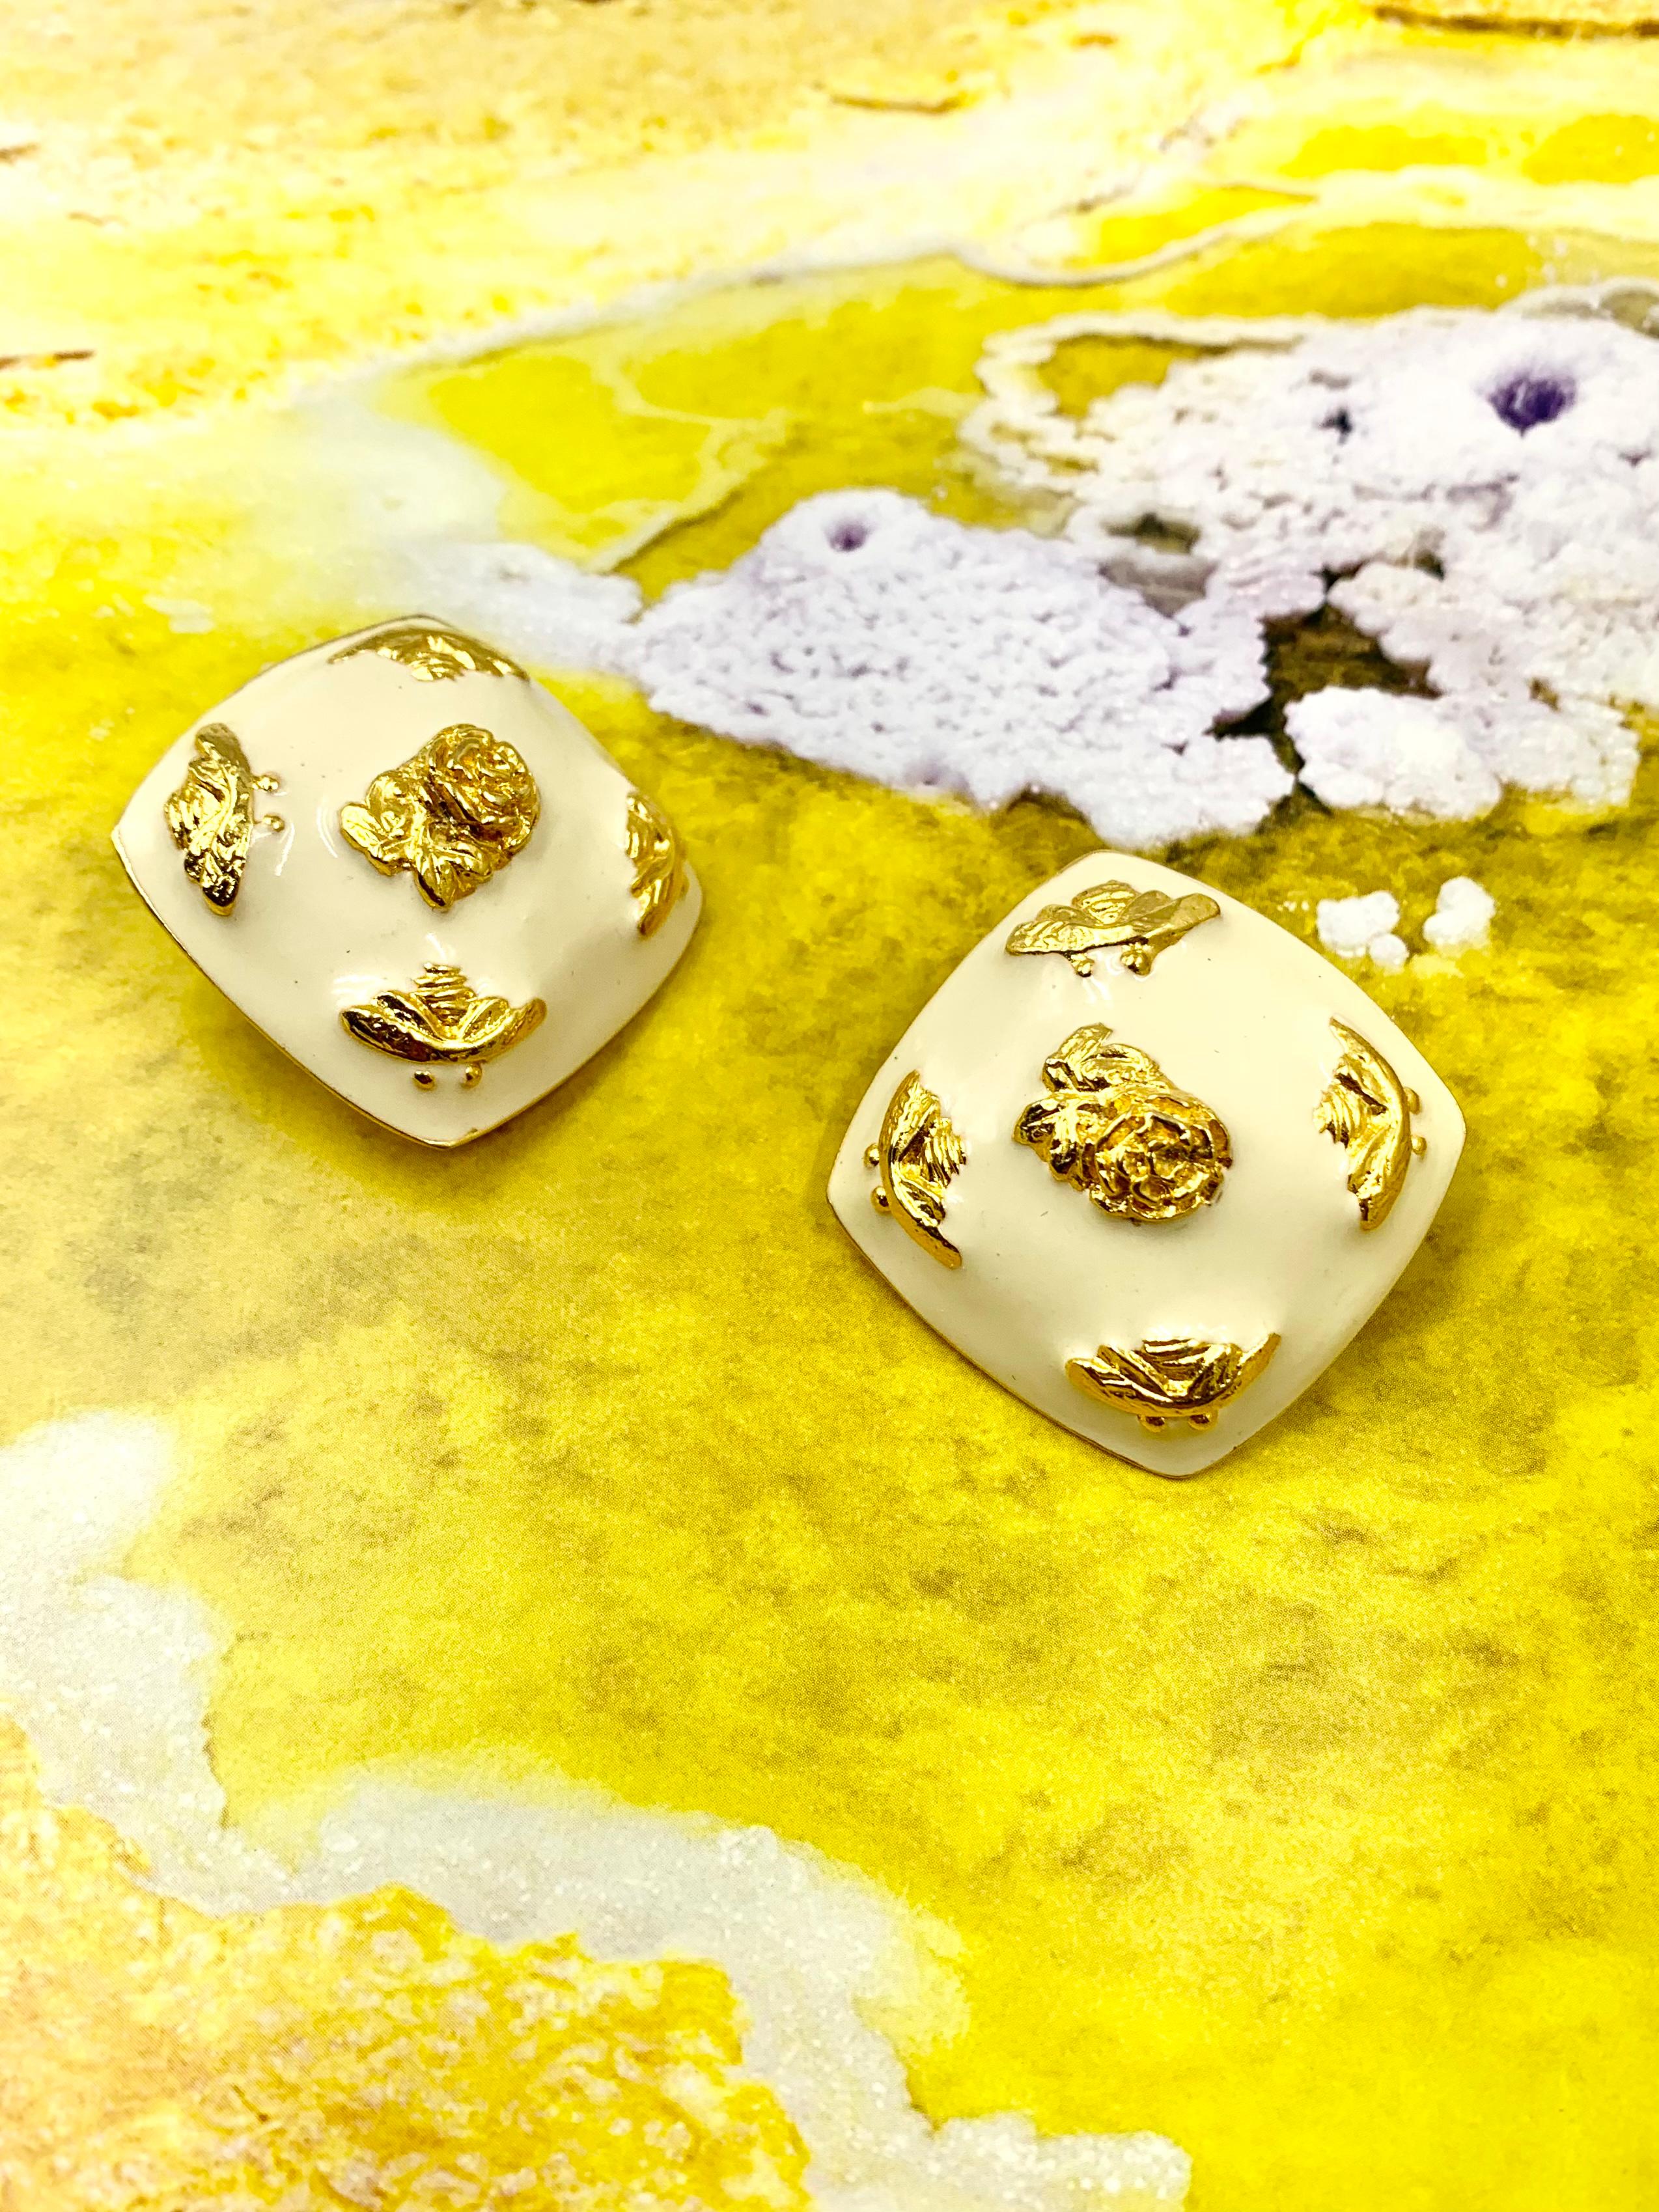 Rare design, glamorous estate KJL rich cream enamel gold plated ear clips with bees and roses motif.
Lovely Spring/Summer accessory for garden aficionados, wedding celebrations, interesting conversation piece.
Excellent condition, great vintage